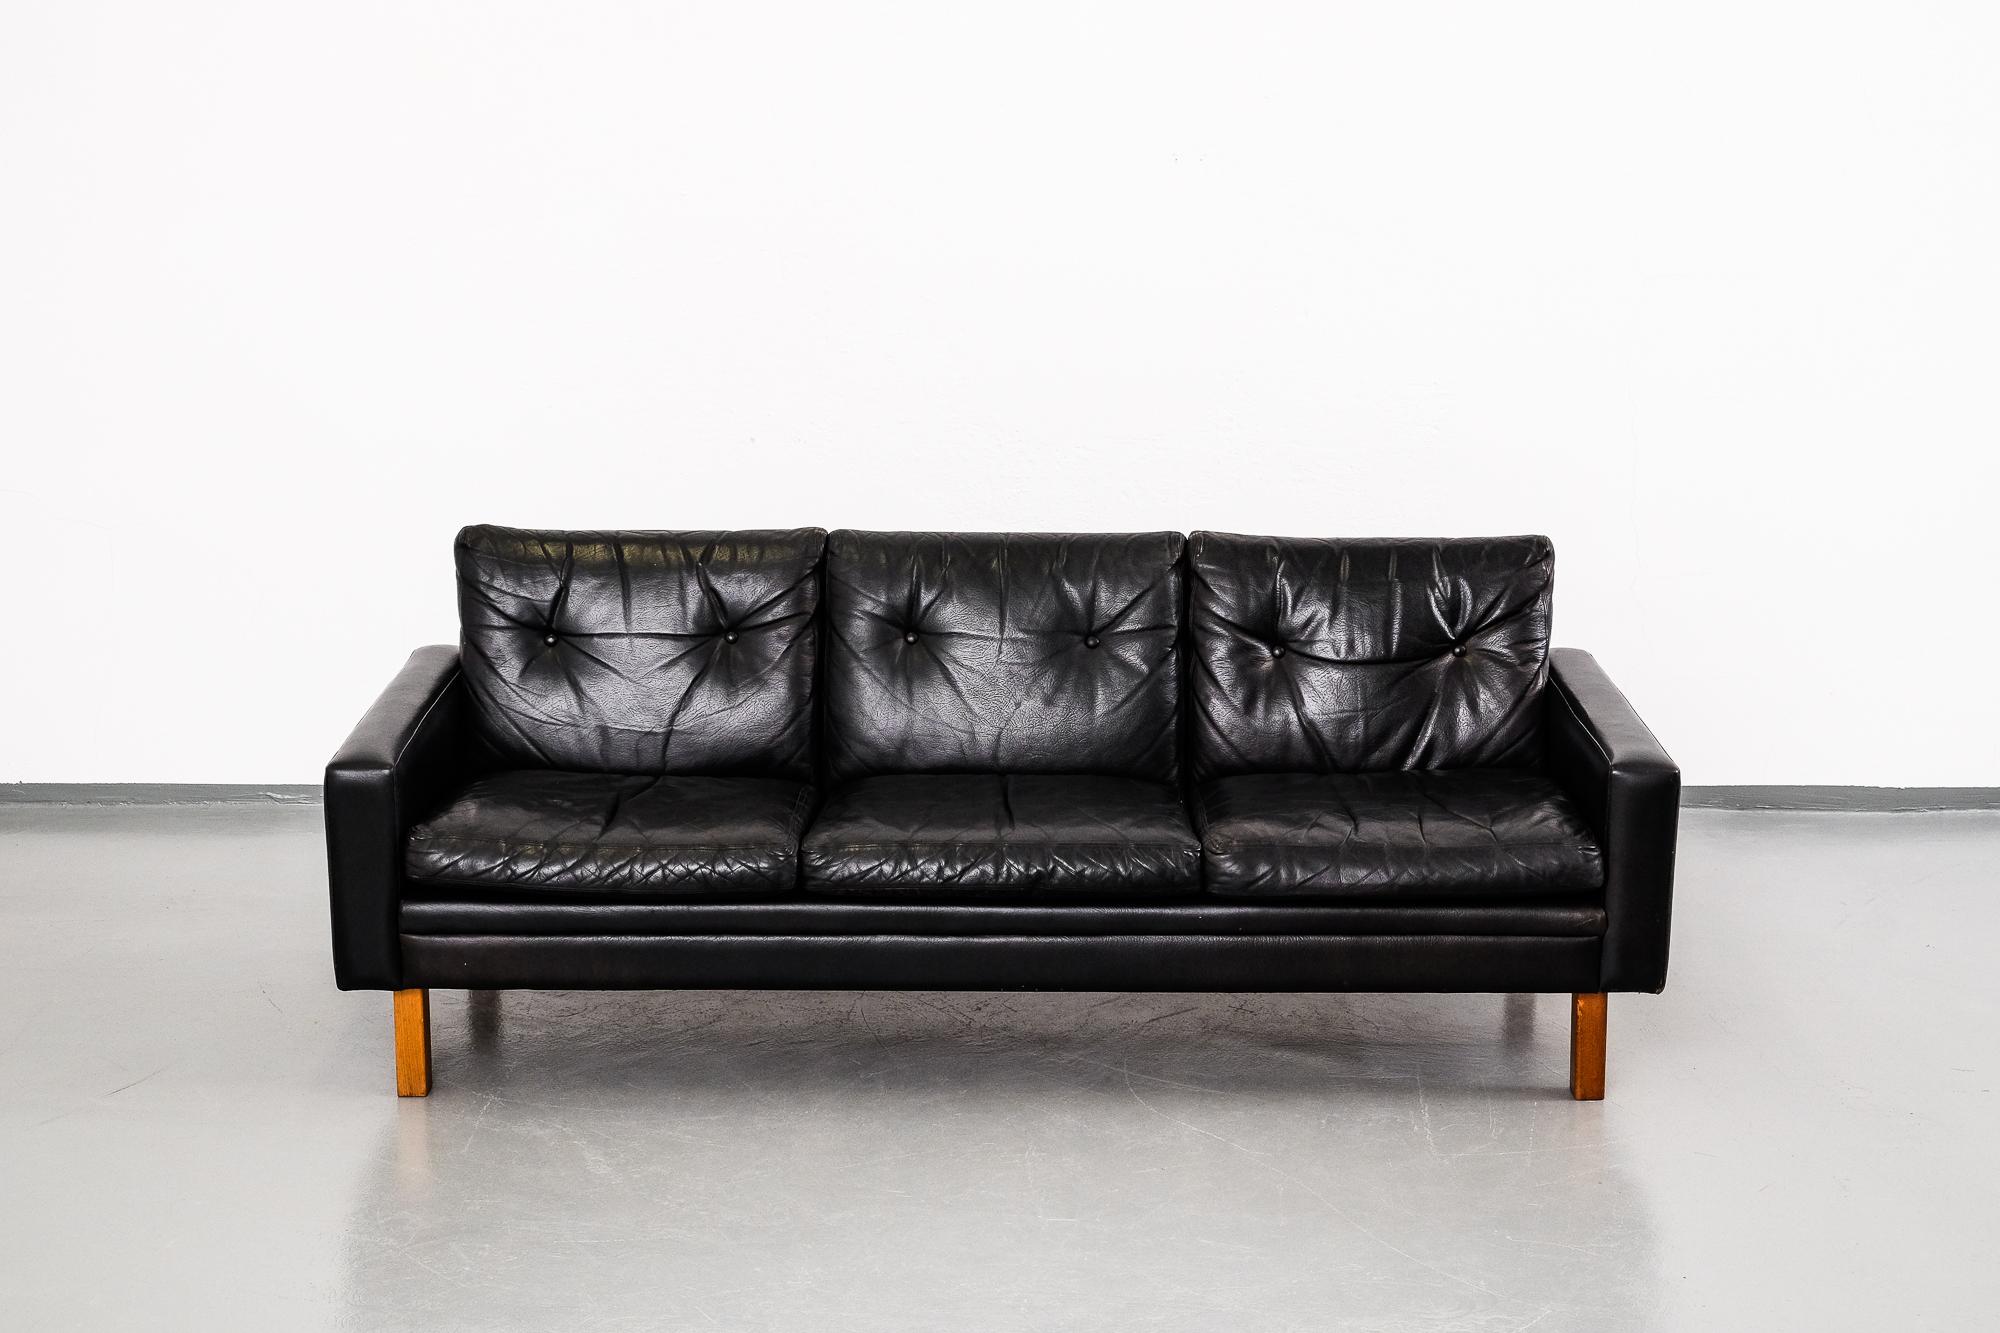 Three-seat sofa in black leather and with teak legs. Scandinavian design from the 1960s. The sofa is in great vintage condition.